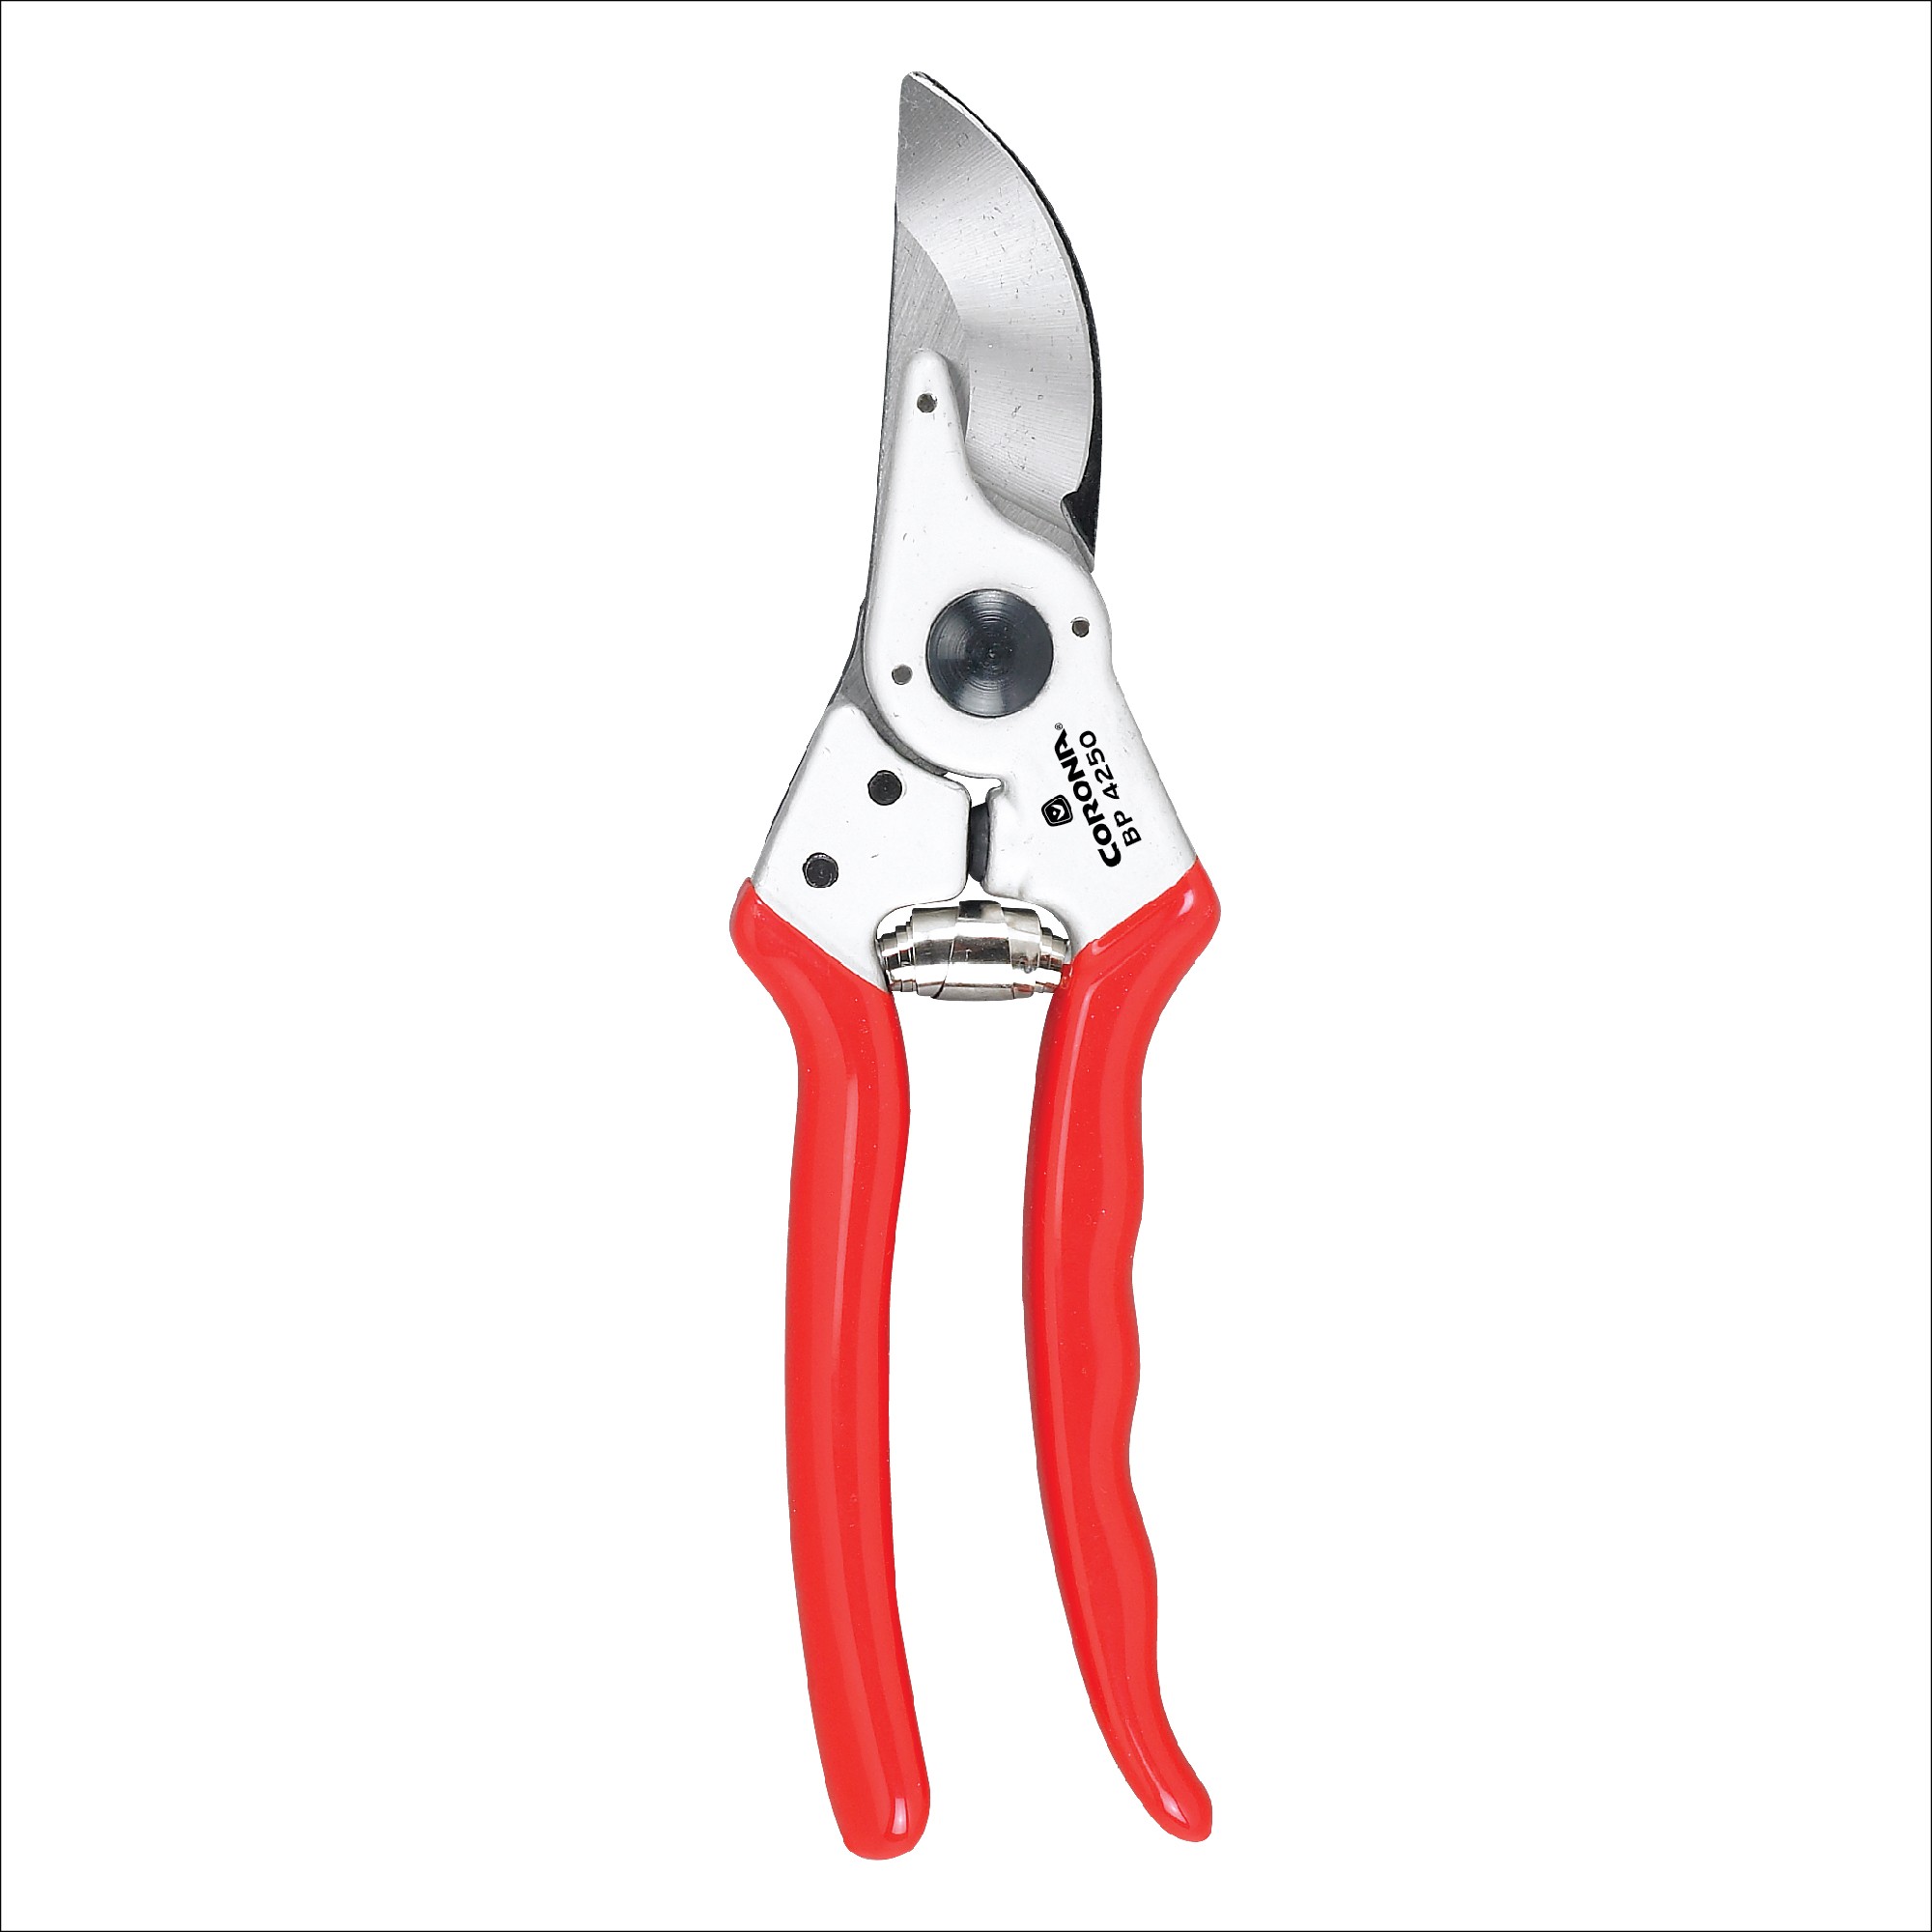 BP 4250 1 In. Forged Bypass Pruner